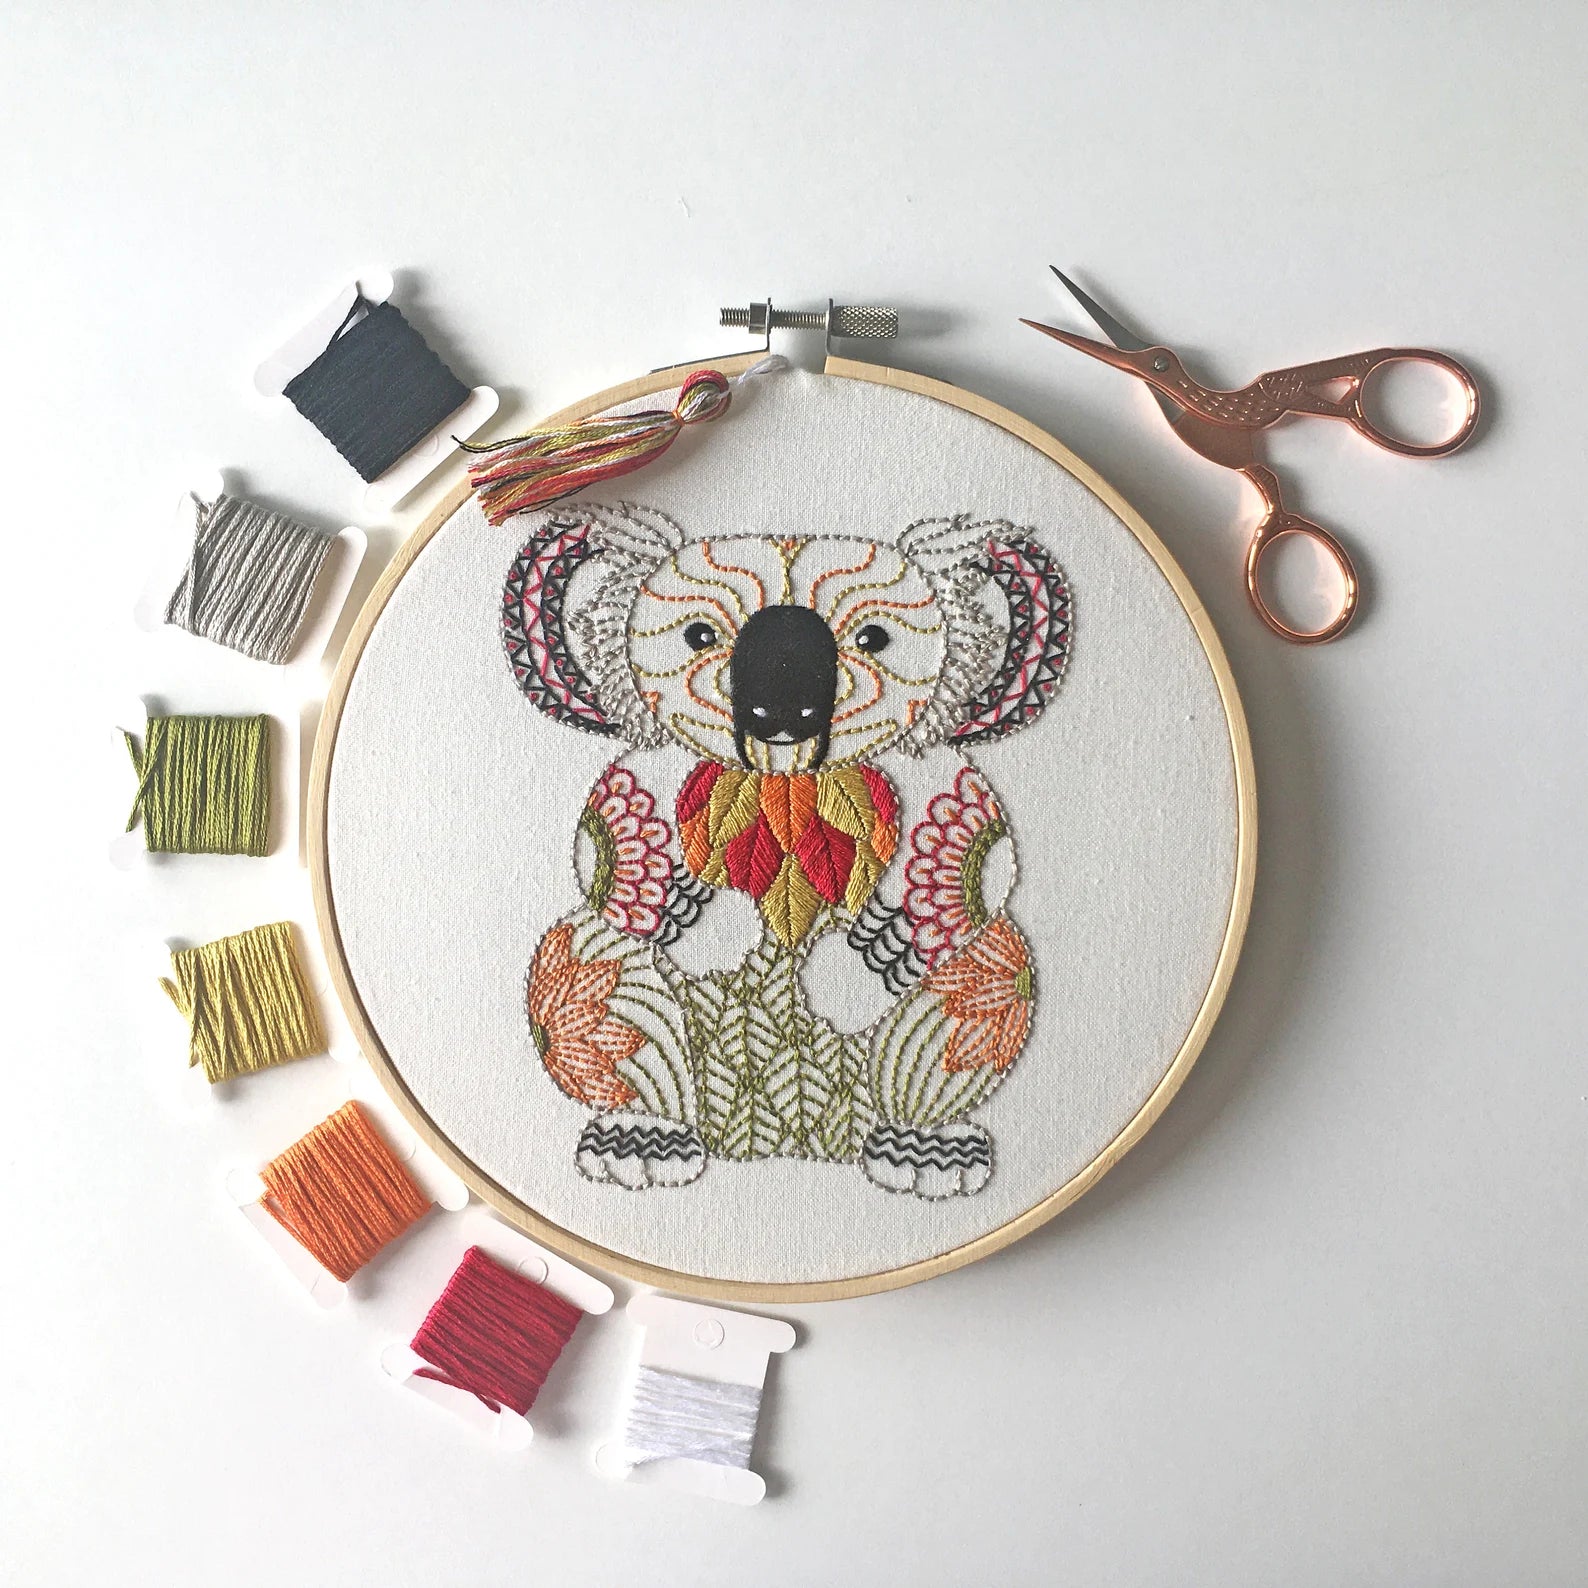 Contrast color stitching three-dimensional functional embroidery